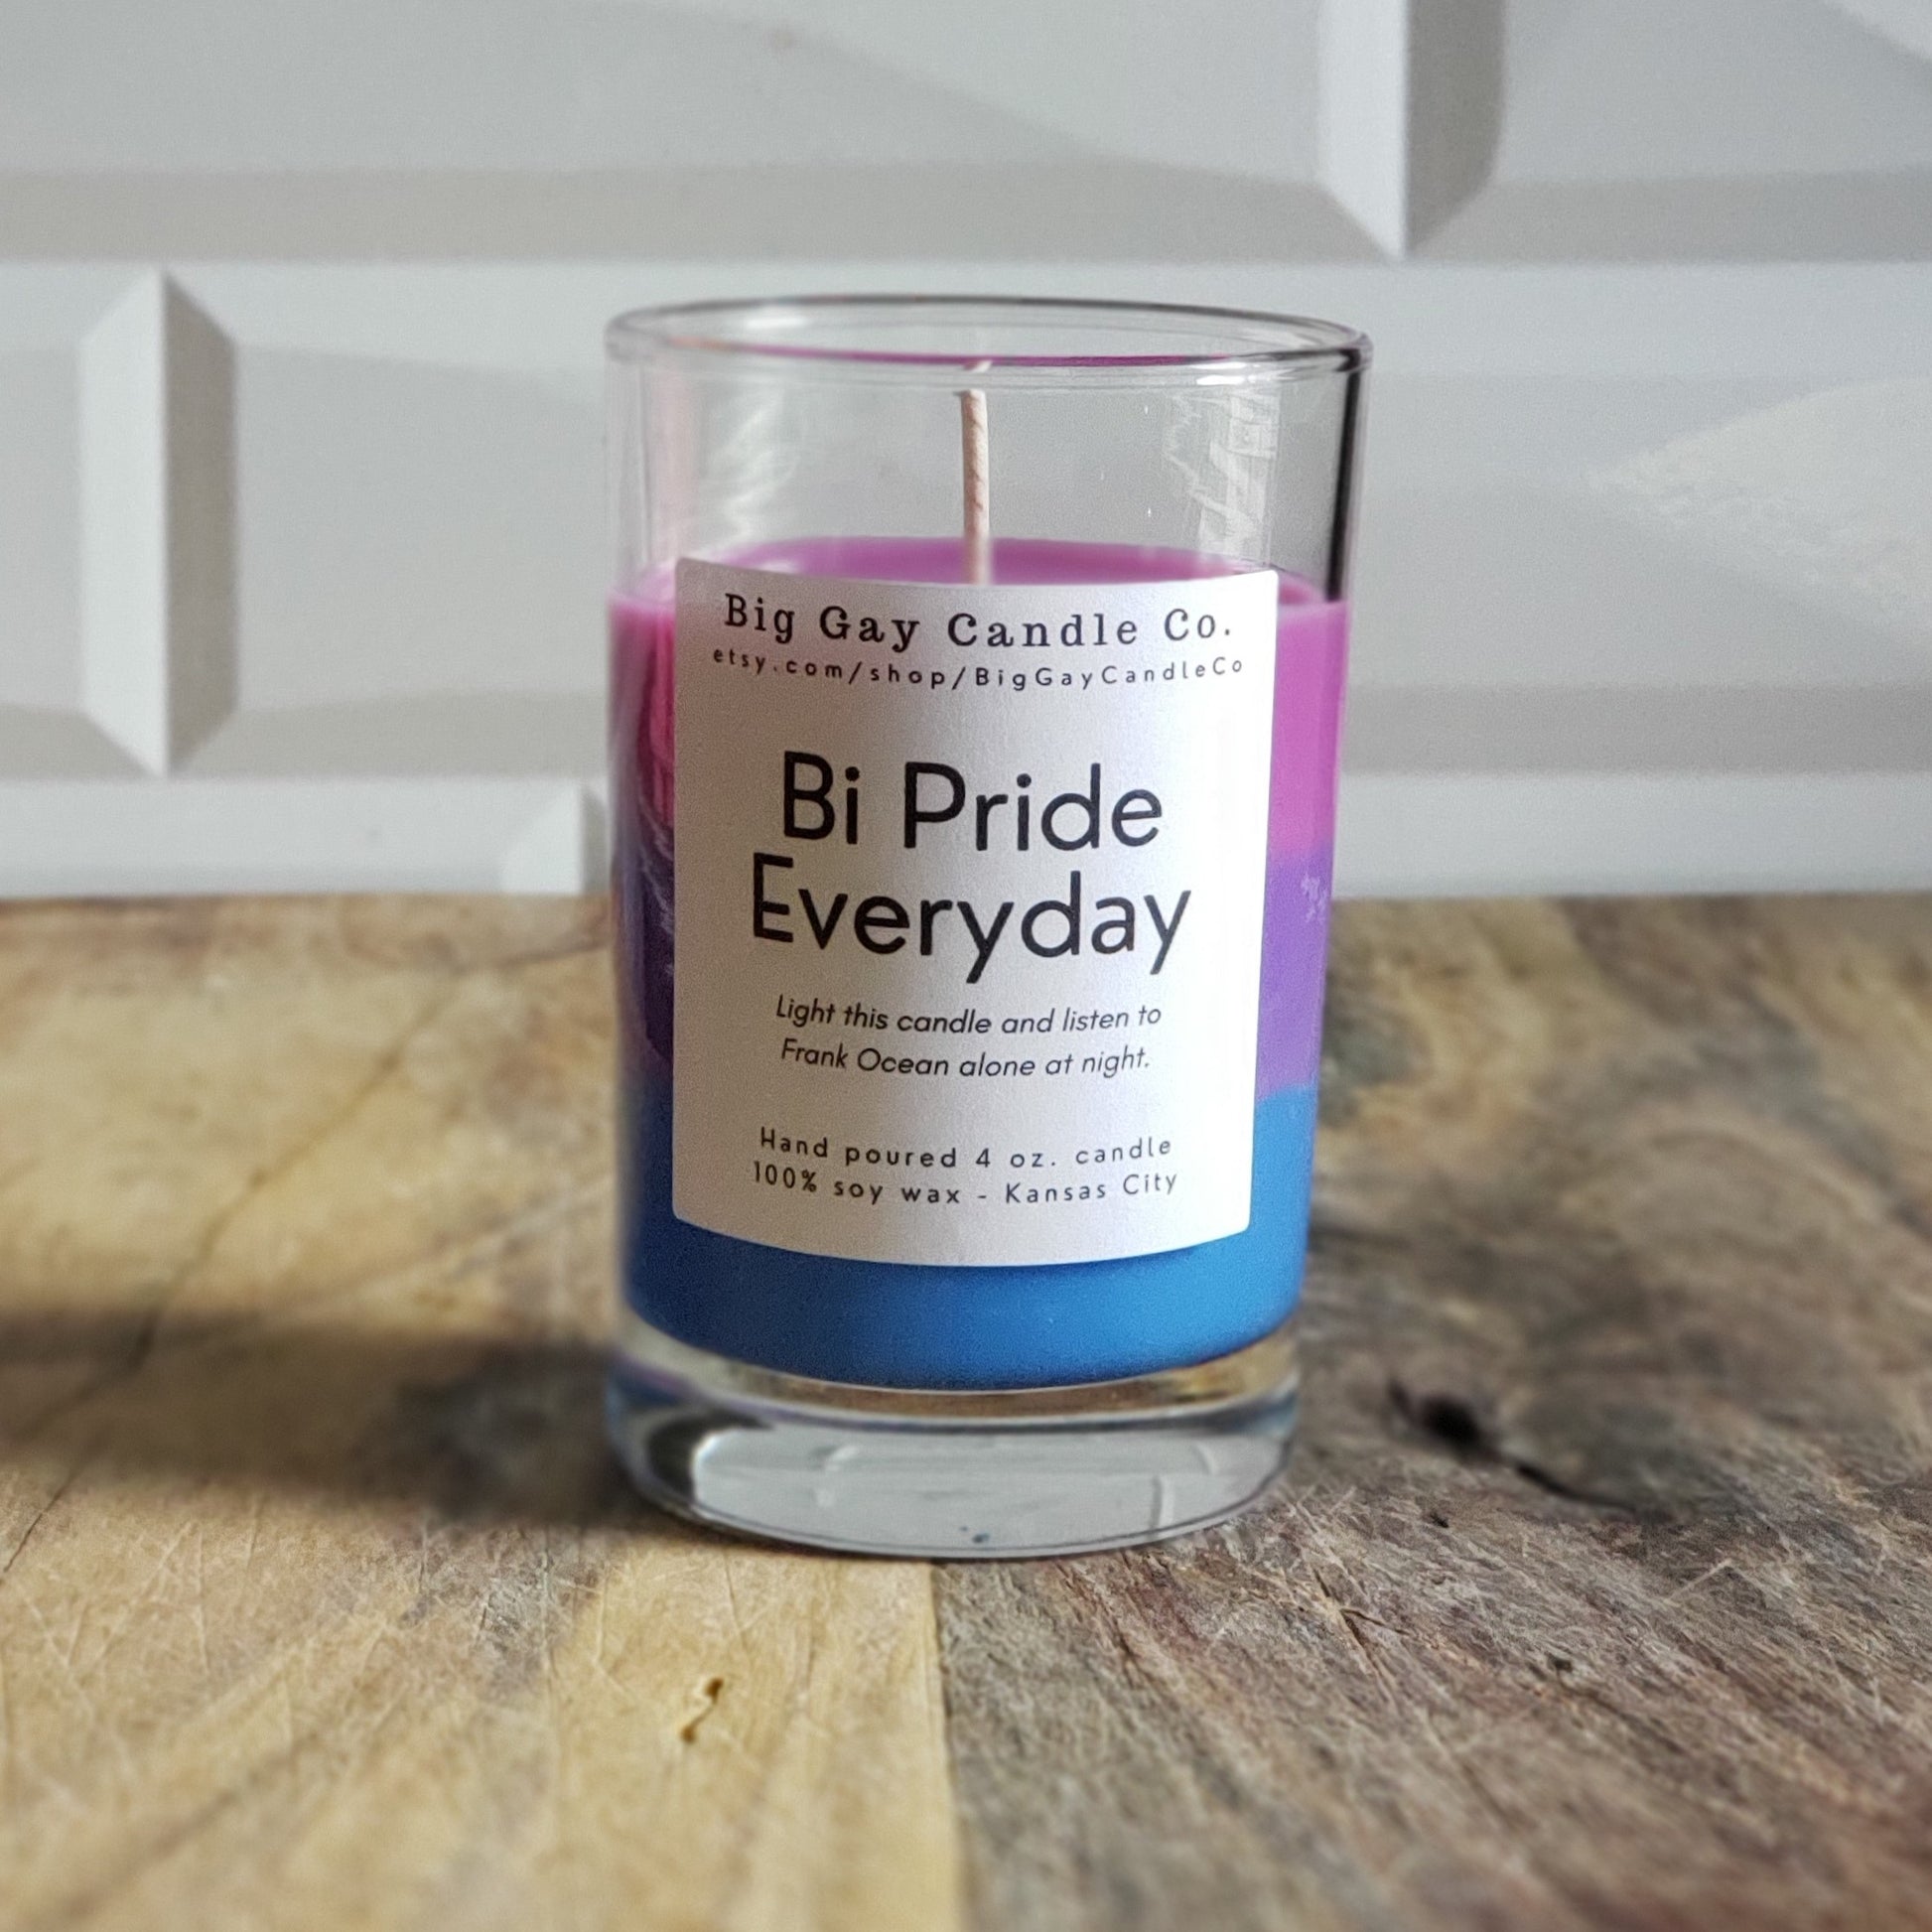 Layered candle of pink, purple, and blue wax in a glass vessel with a black and white label that says Bi Pride Everyday: Light this candle and listen to Frank Ocean alone at night. Sitting in front of a white tile background and sitting on a wood board.